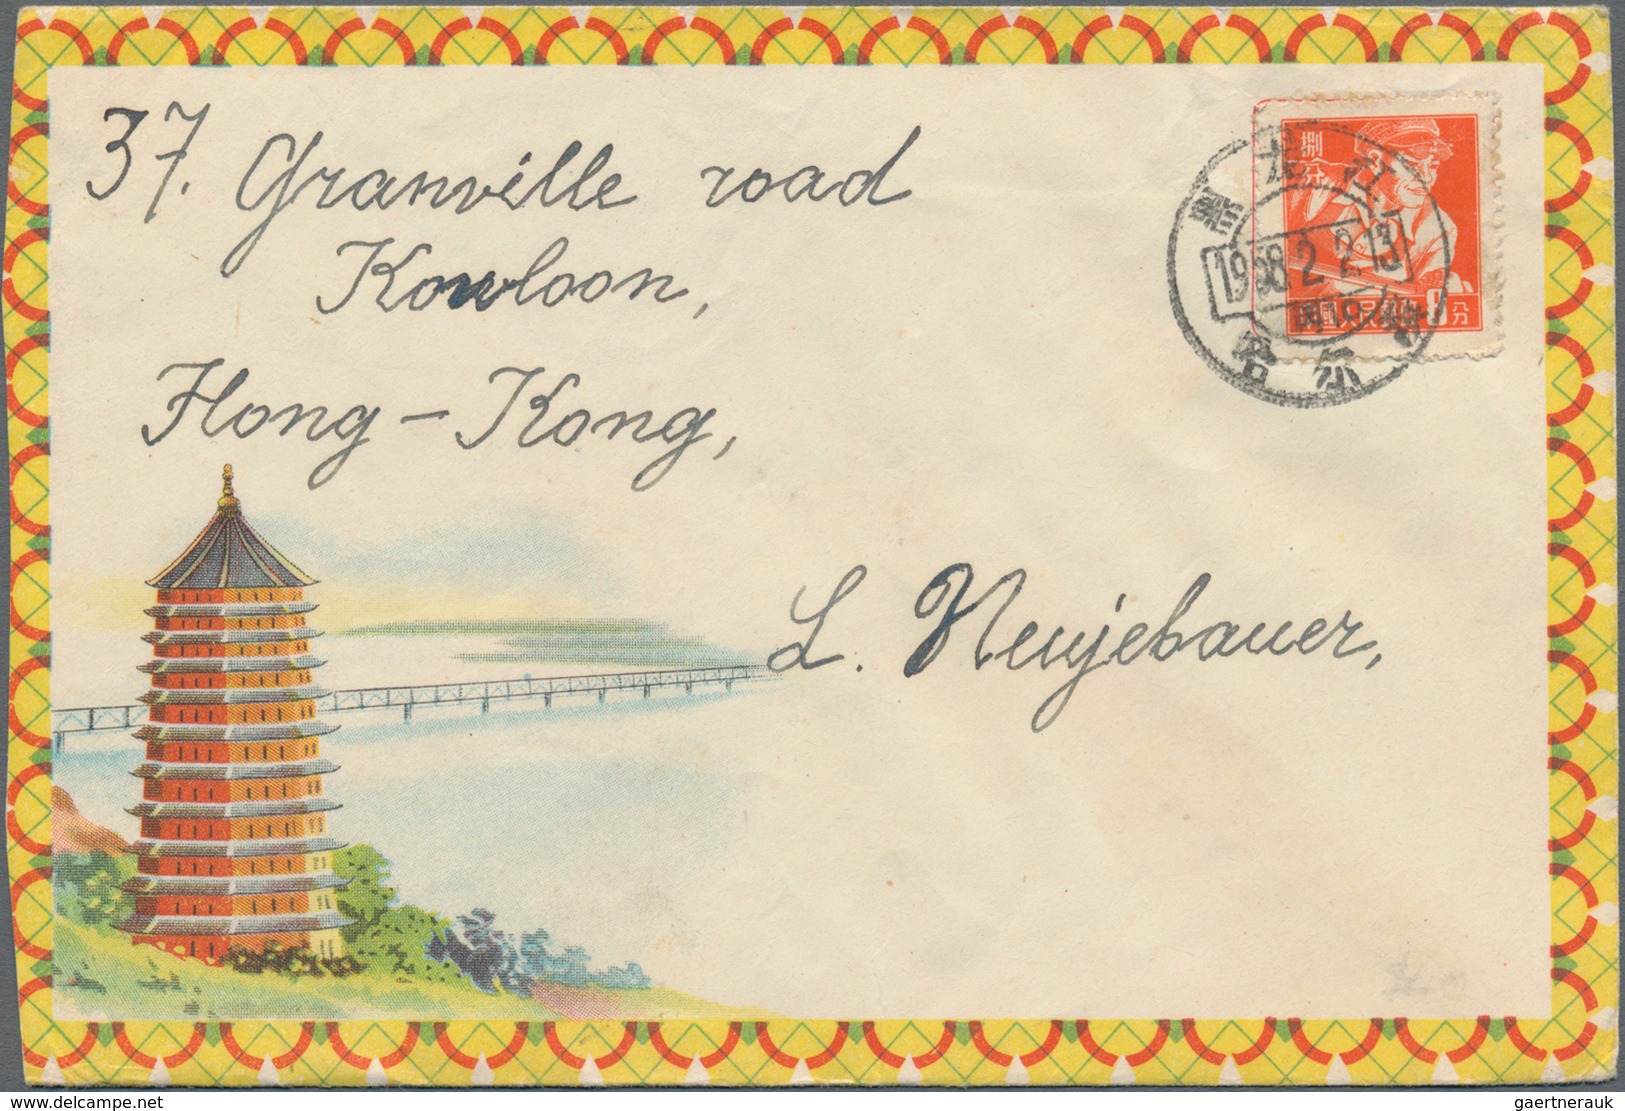 China - Volksrepublik: 1953/1960, illustrated covers used to Hong Kong (18, mostly surface) or to Ru